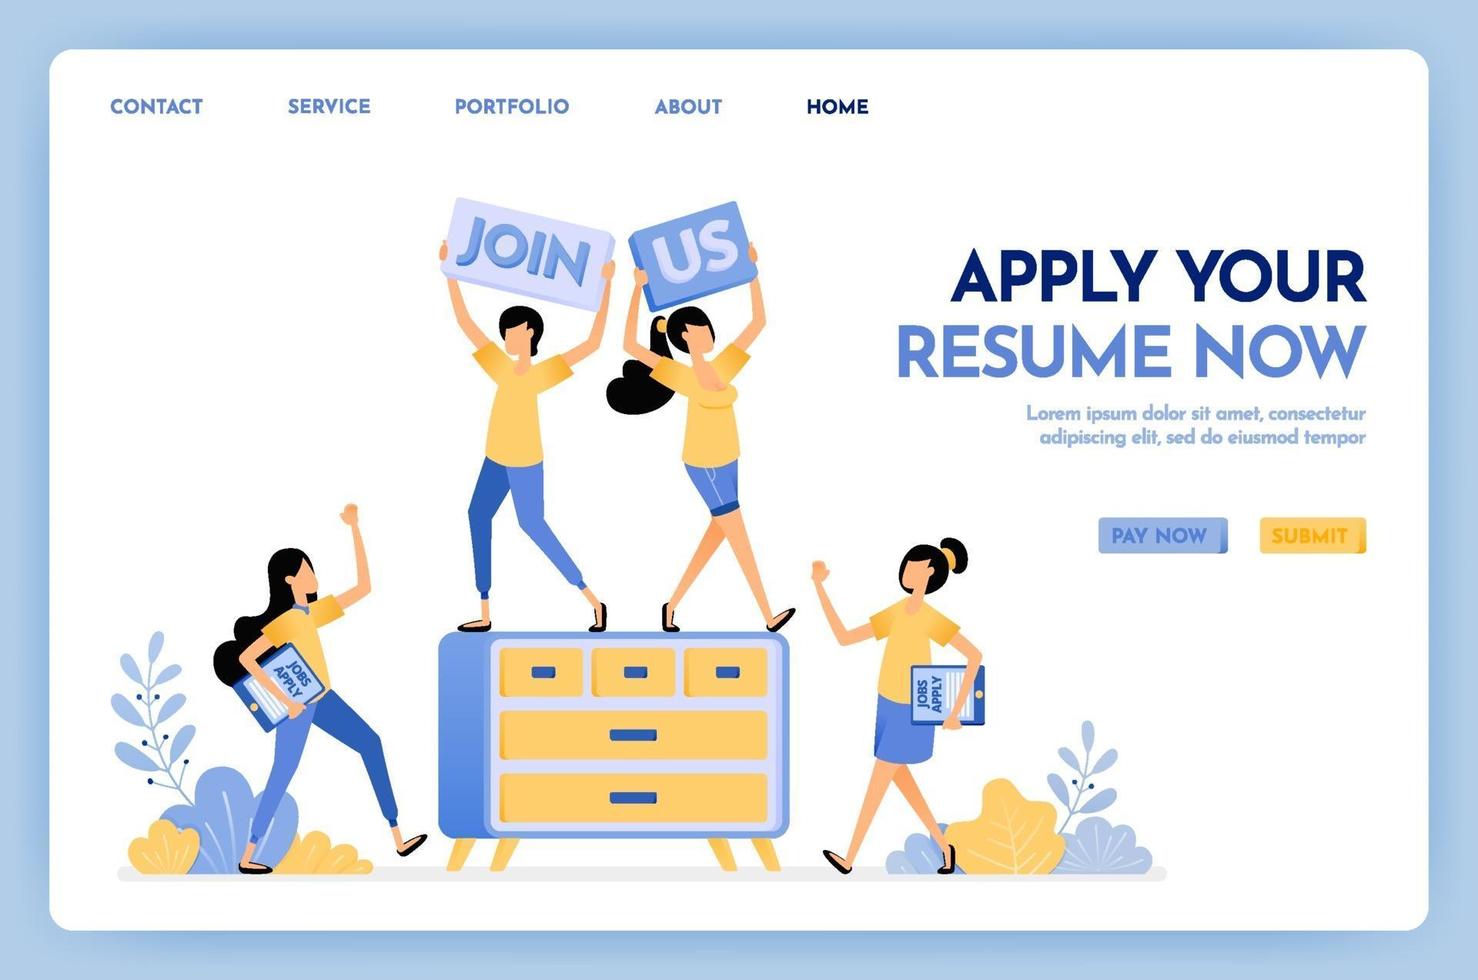 Illustration of join us hiring people. People applying for jobs by submitting resumes. We are hiring work at home for freelance jobs. Design concept for banner, landing page, web, website, poster, ui vector